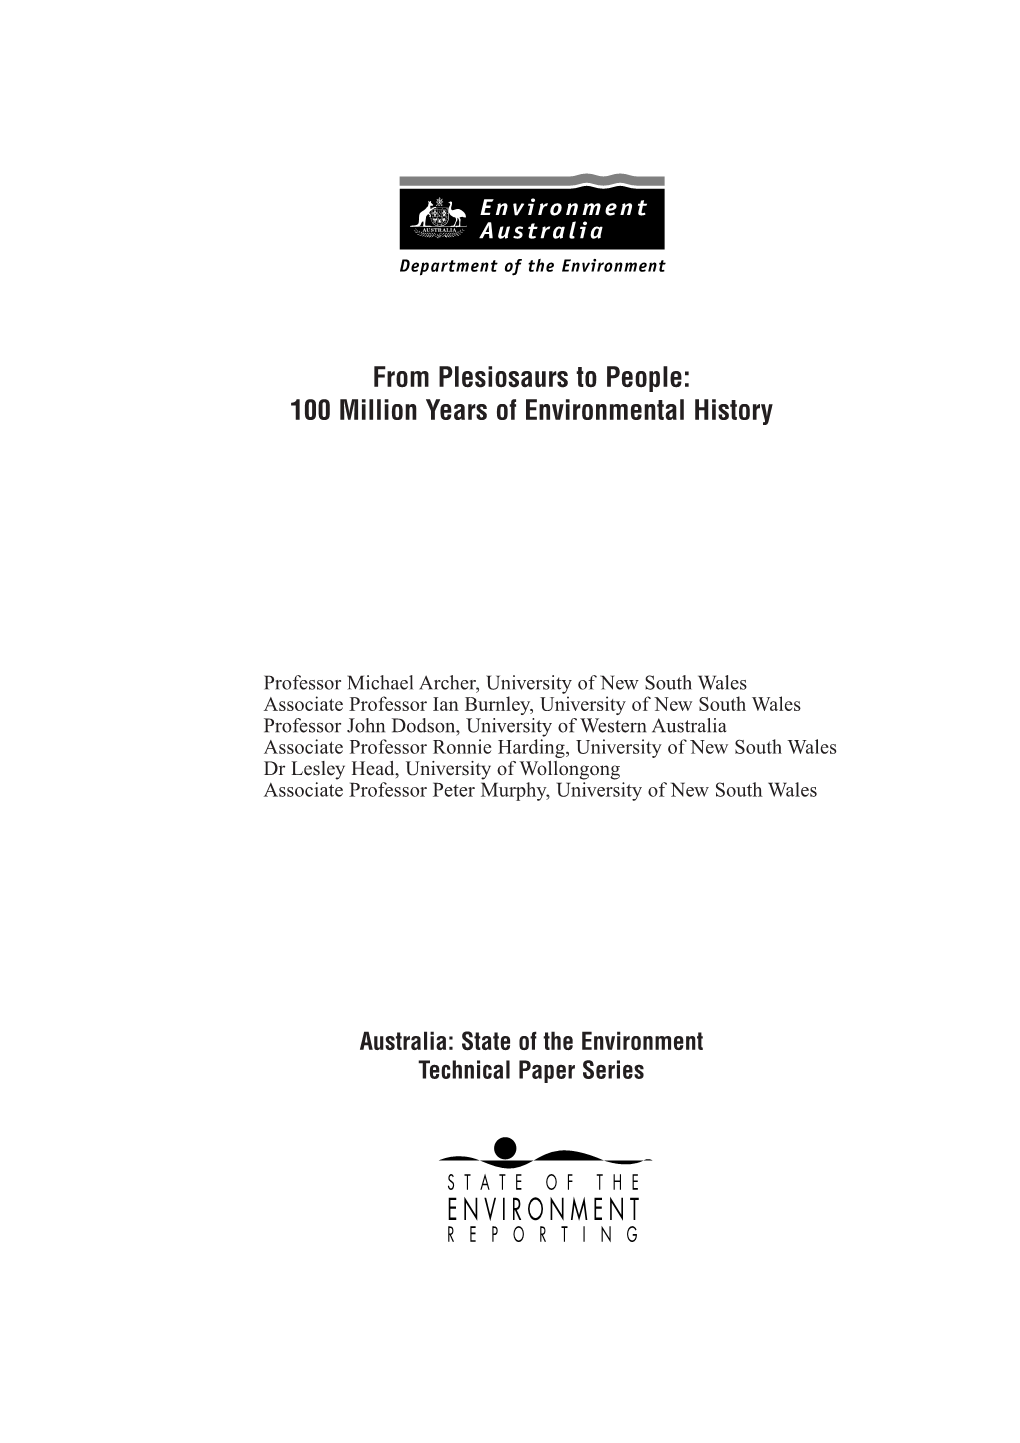 Environmental History, Australia: State of the Environment Technical Paper Series (Portrait of Australia), Department of the Environment, Canberra